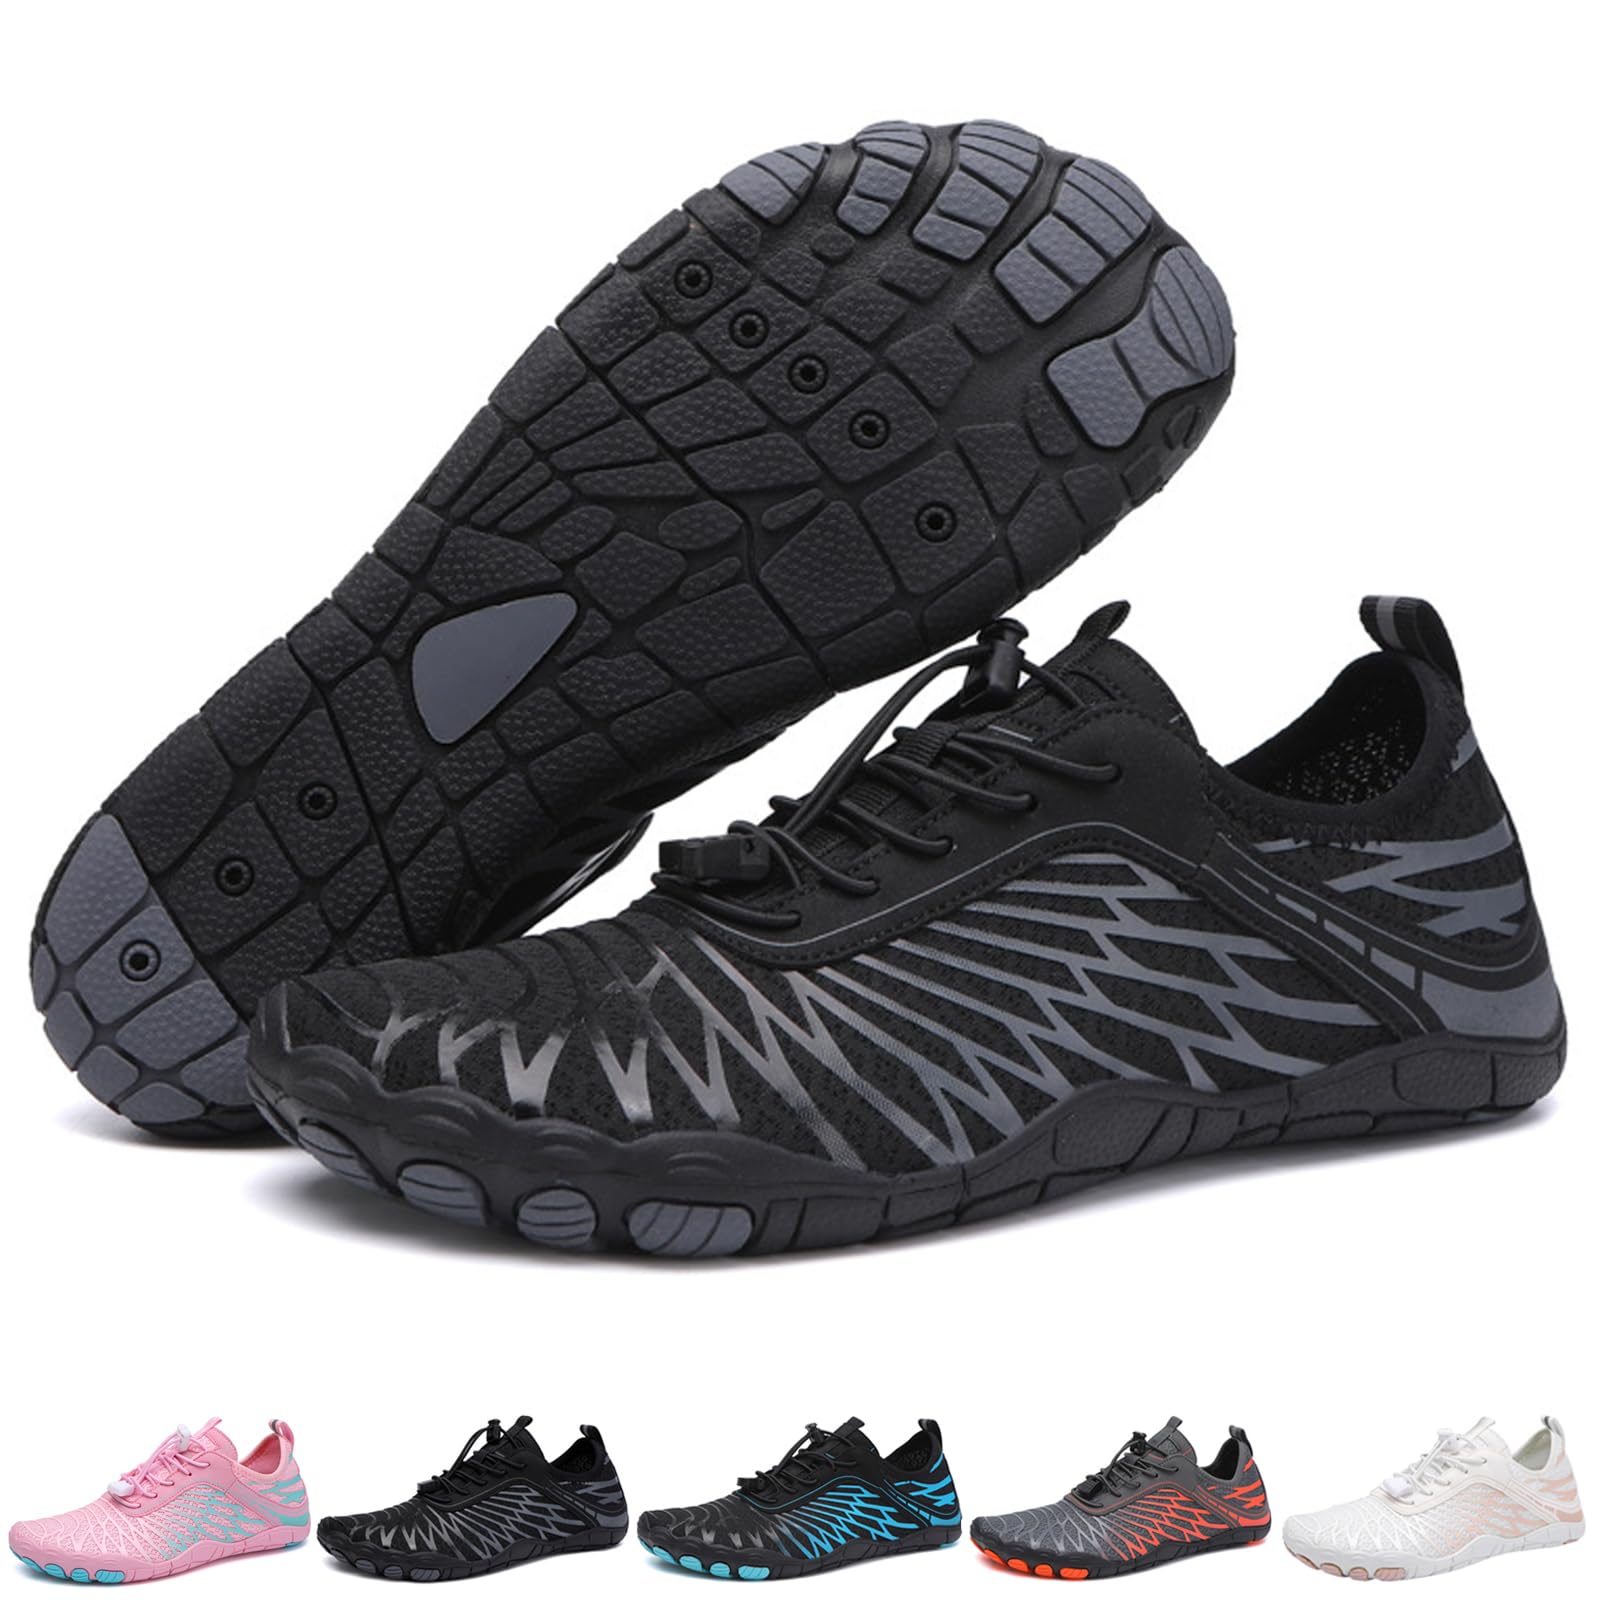 Hike Footwear Barefoot Womens - Unisex Mens Womens Athletic Hiking Quick Dry Non-Slip Barefoot Shoes